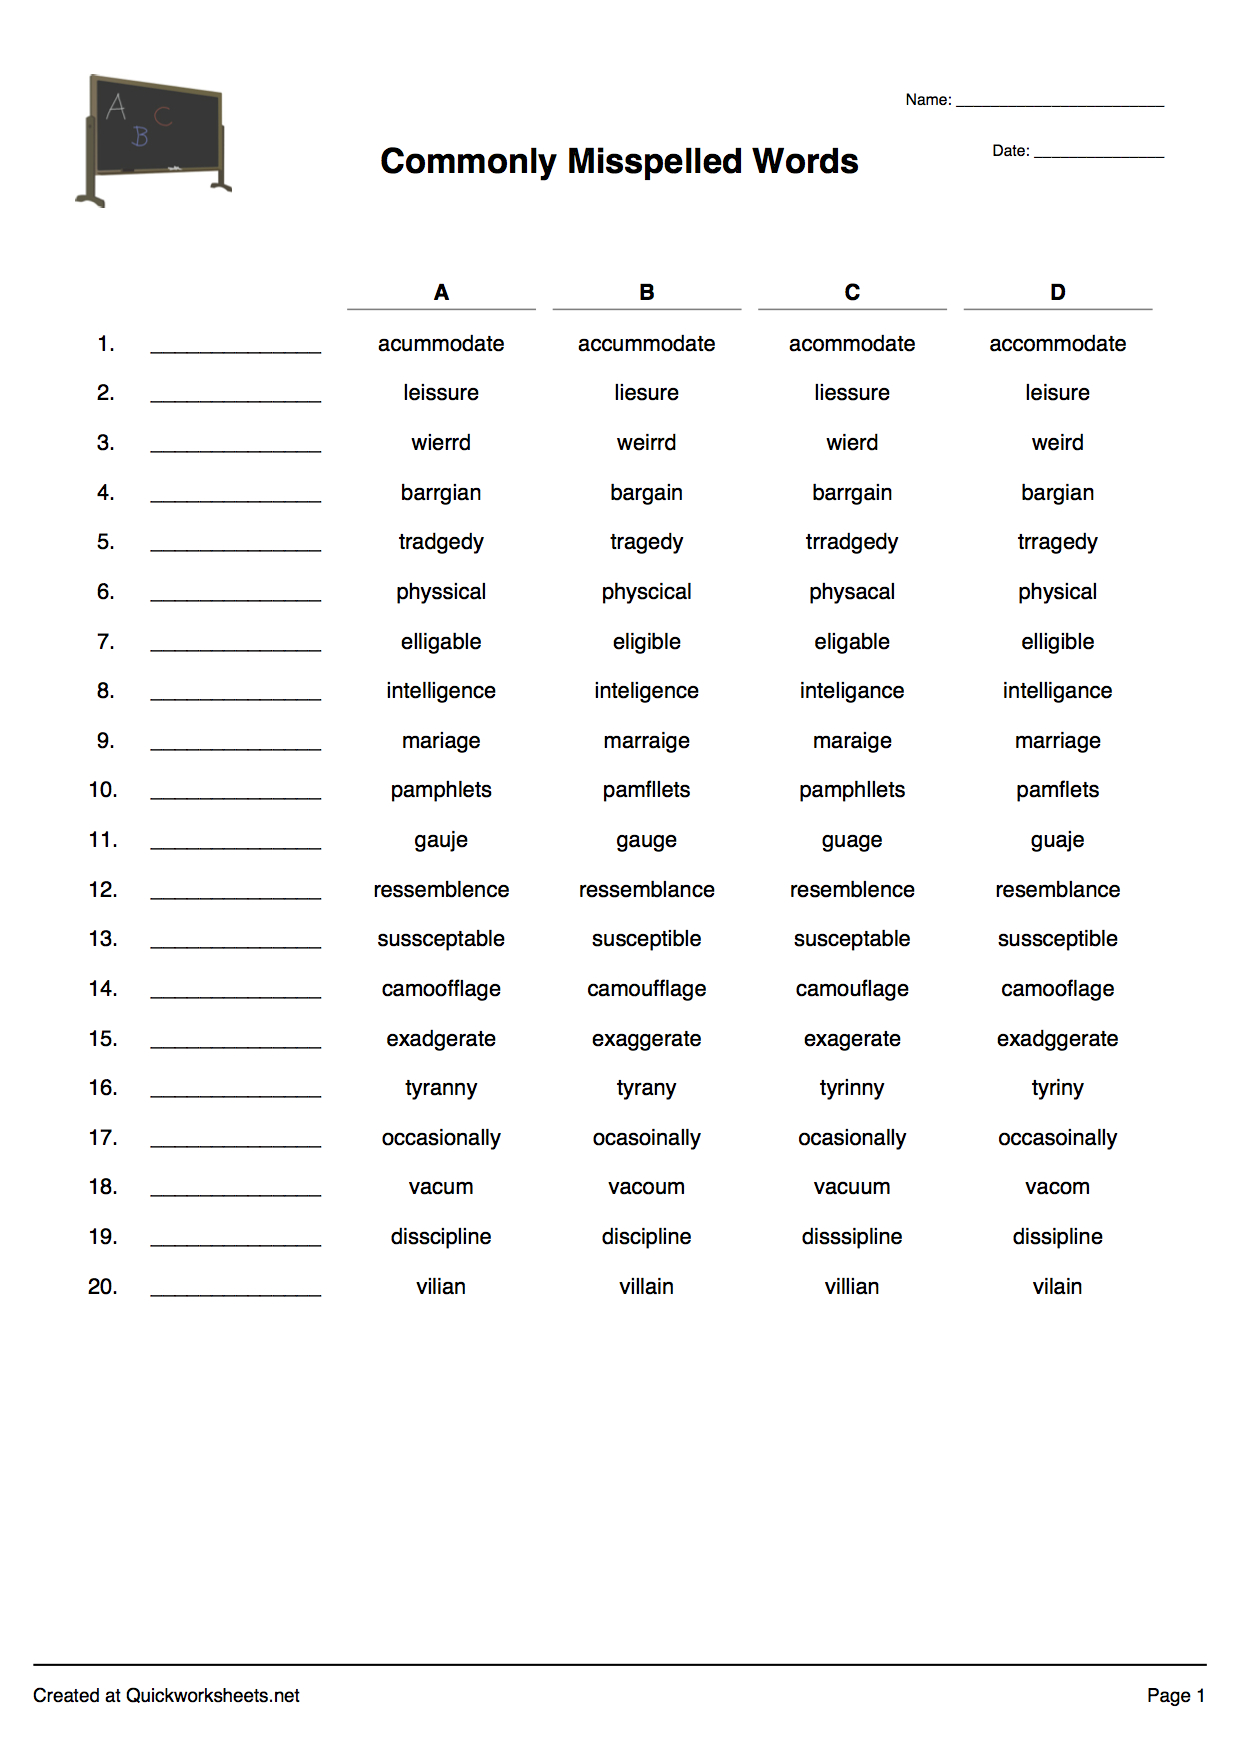 Word Scramble, Wordsearch, Crossword, Matching Pairs And Other - Free Printable Test Maker